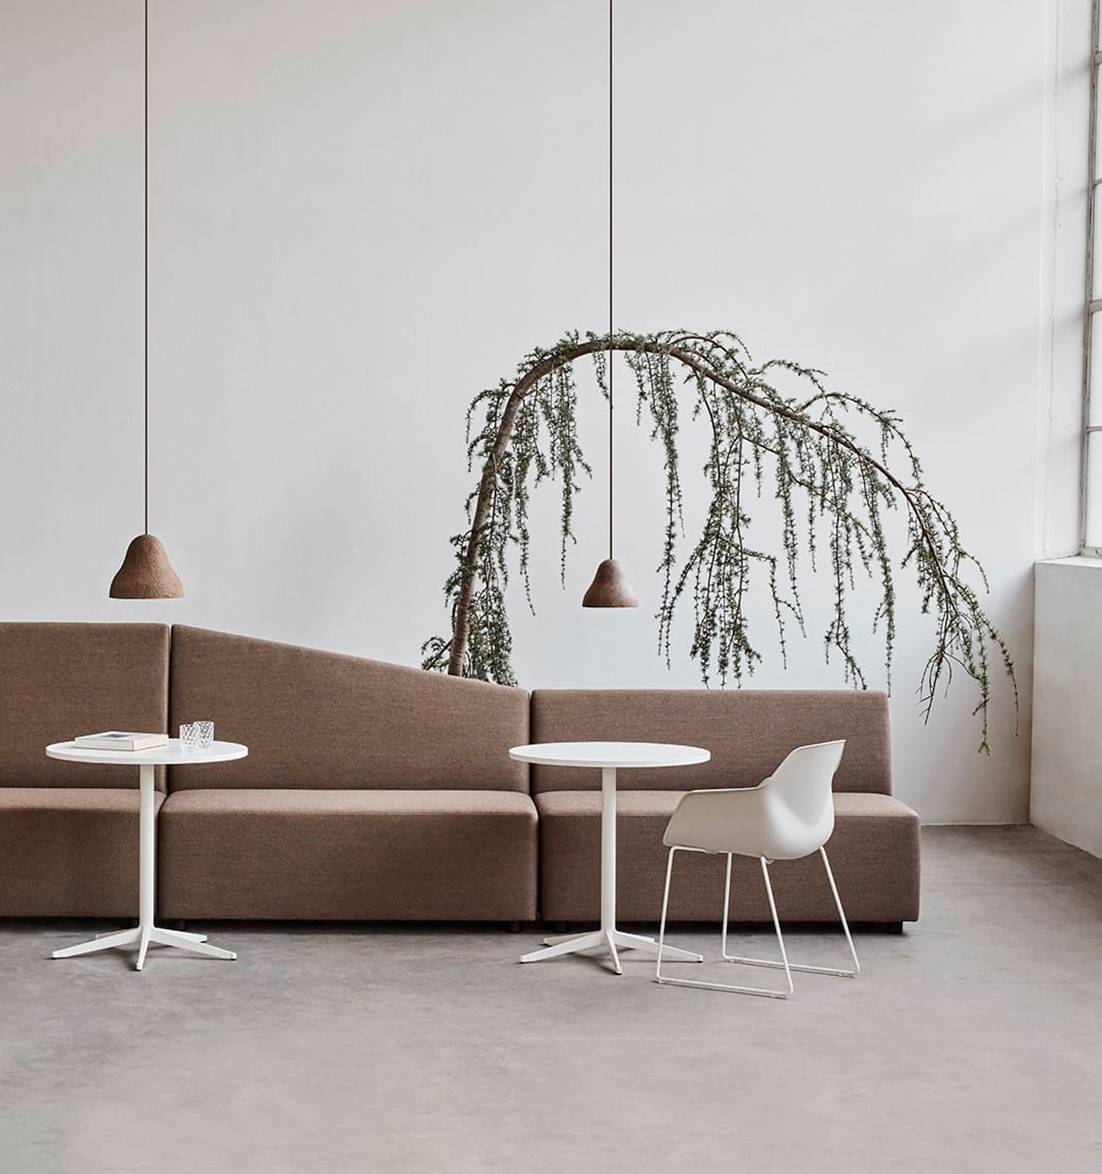 Modular seating, table and office desk chairs in a room with a tree.